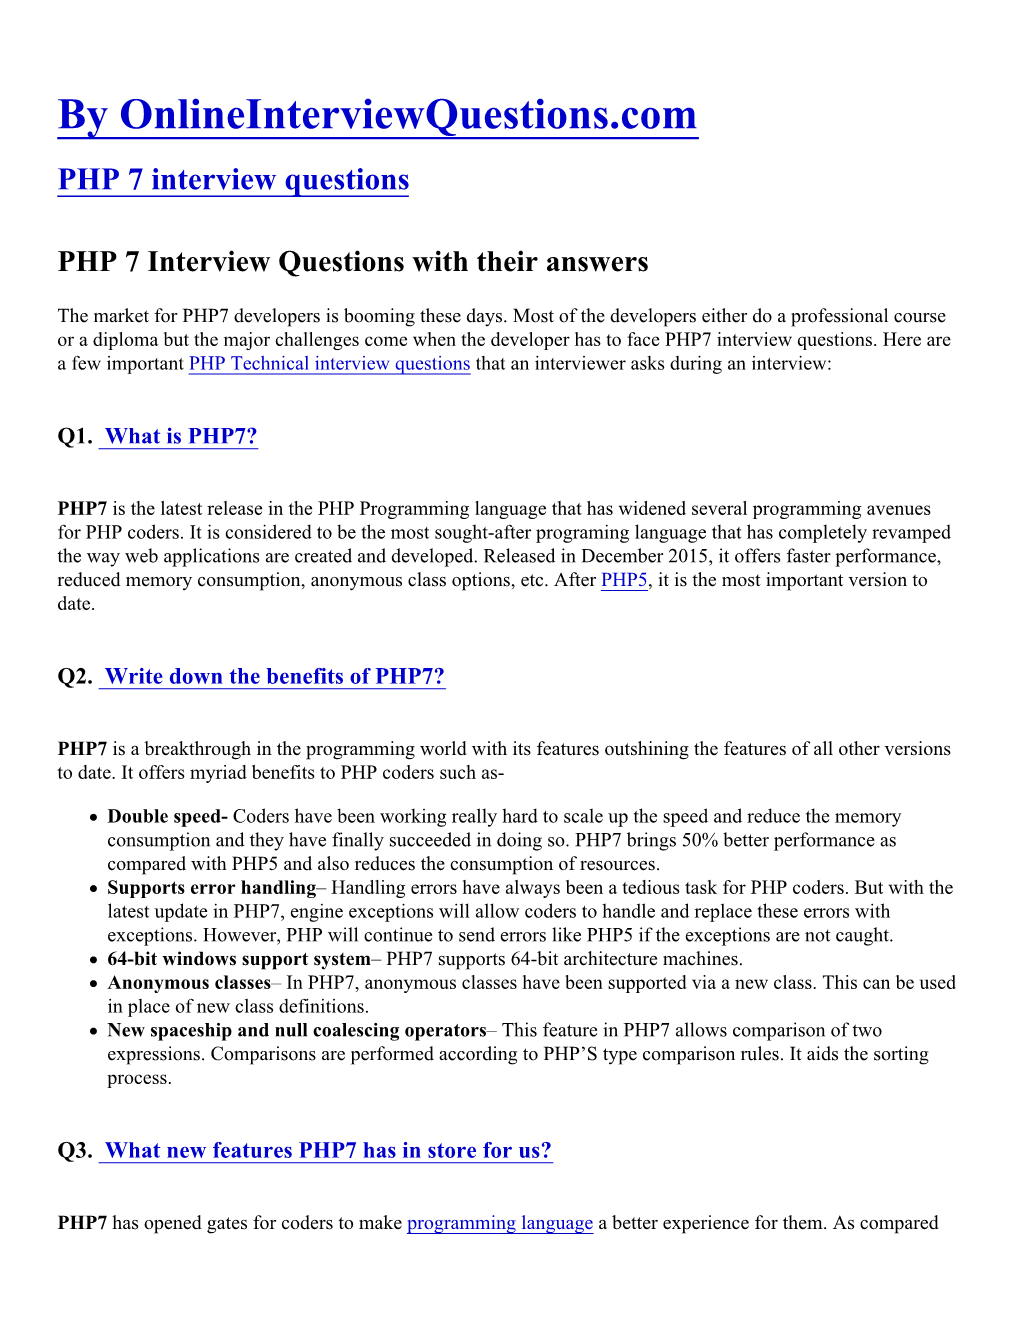 PHP 7 Interview Questions